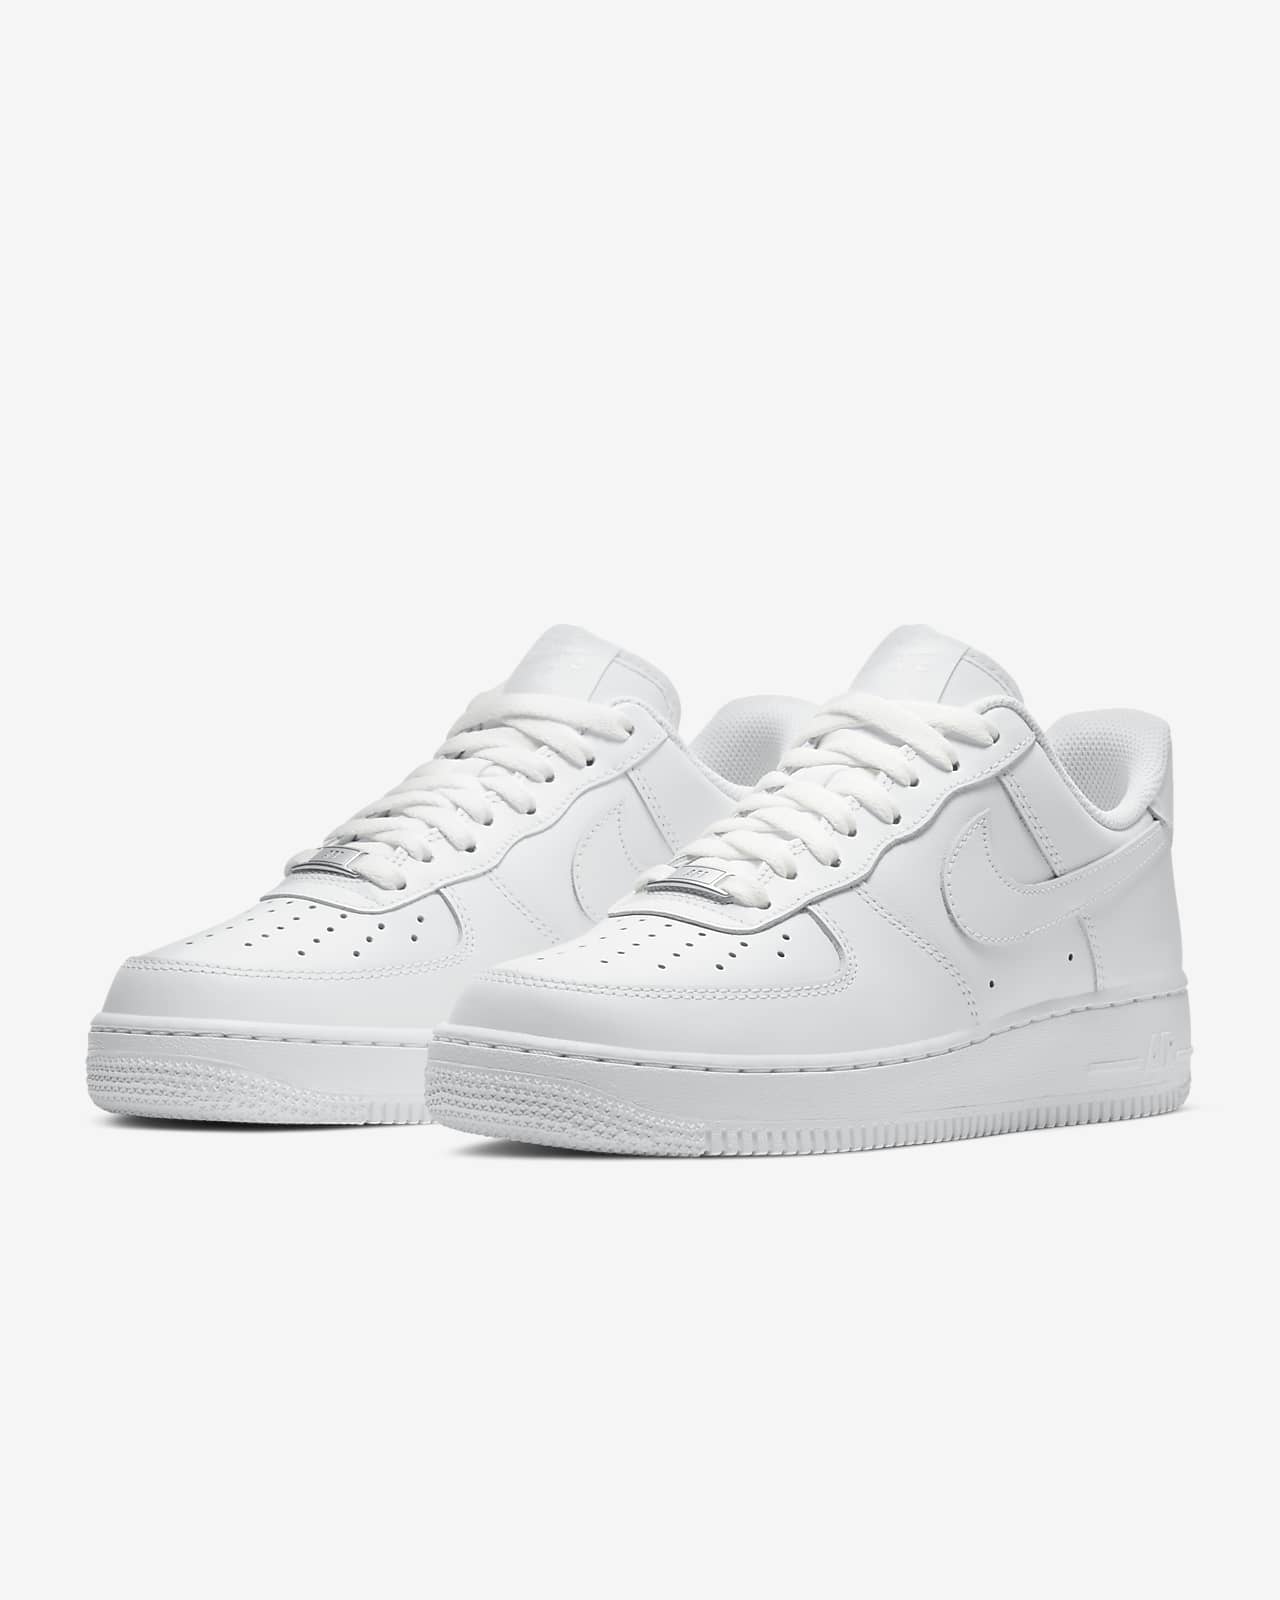 air force 1 low size 7.5